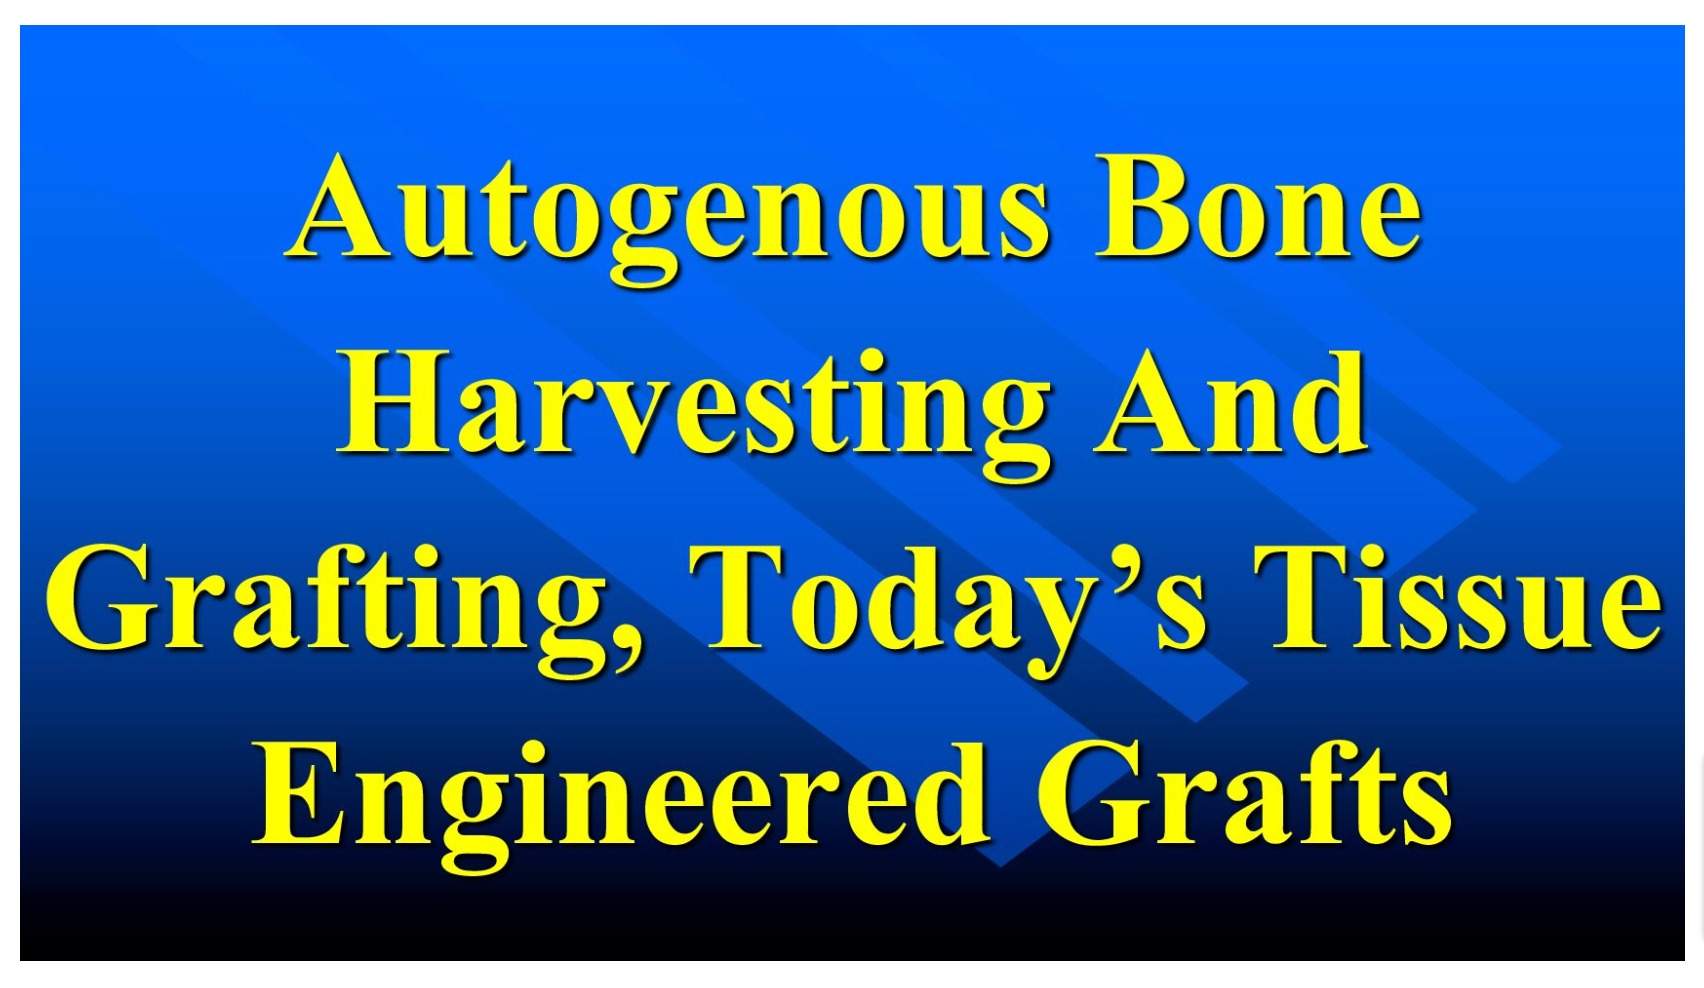 Autogenous Bone Harvesting and Grafting, Today's Tissue Engineered Grafts